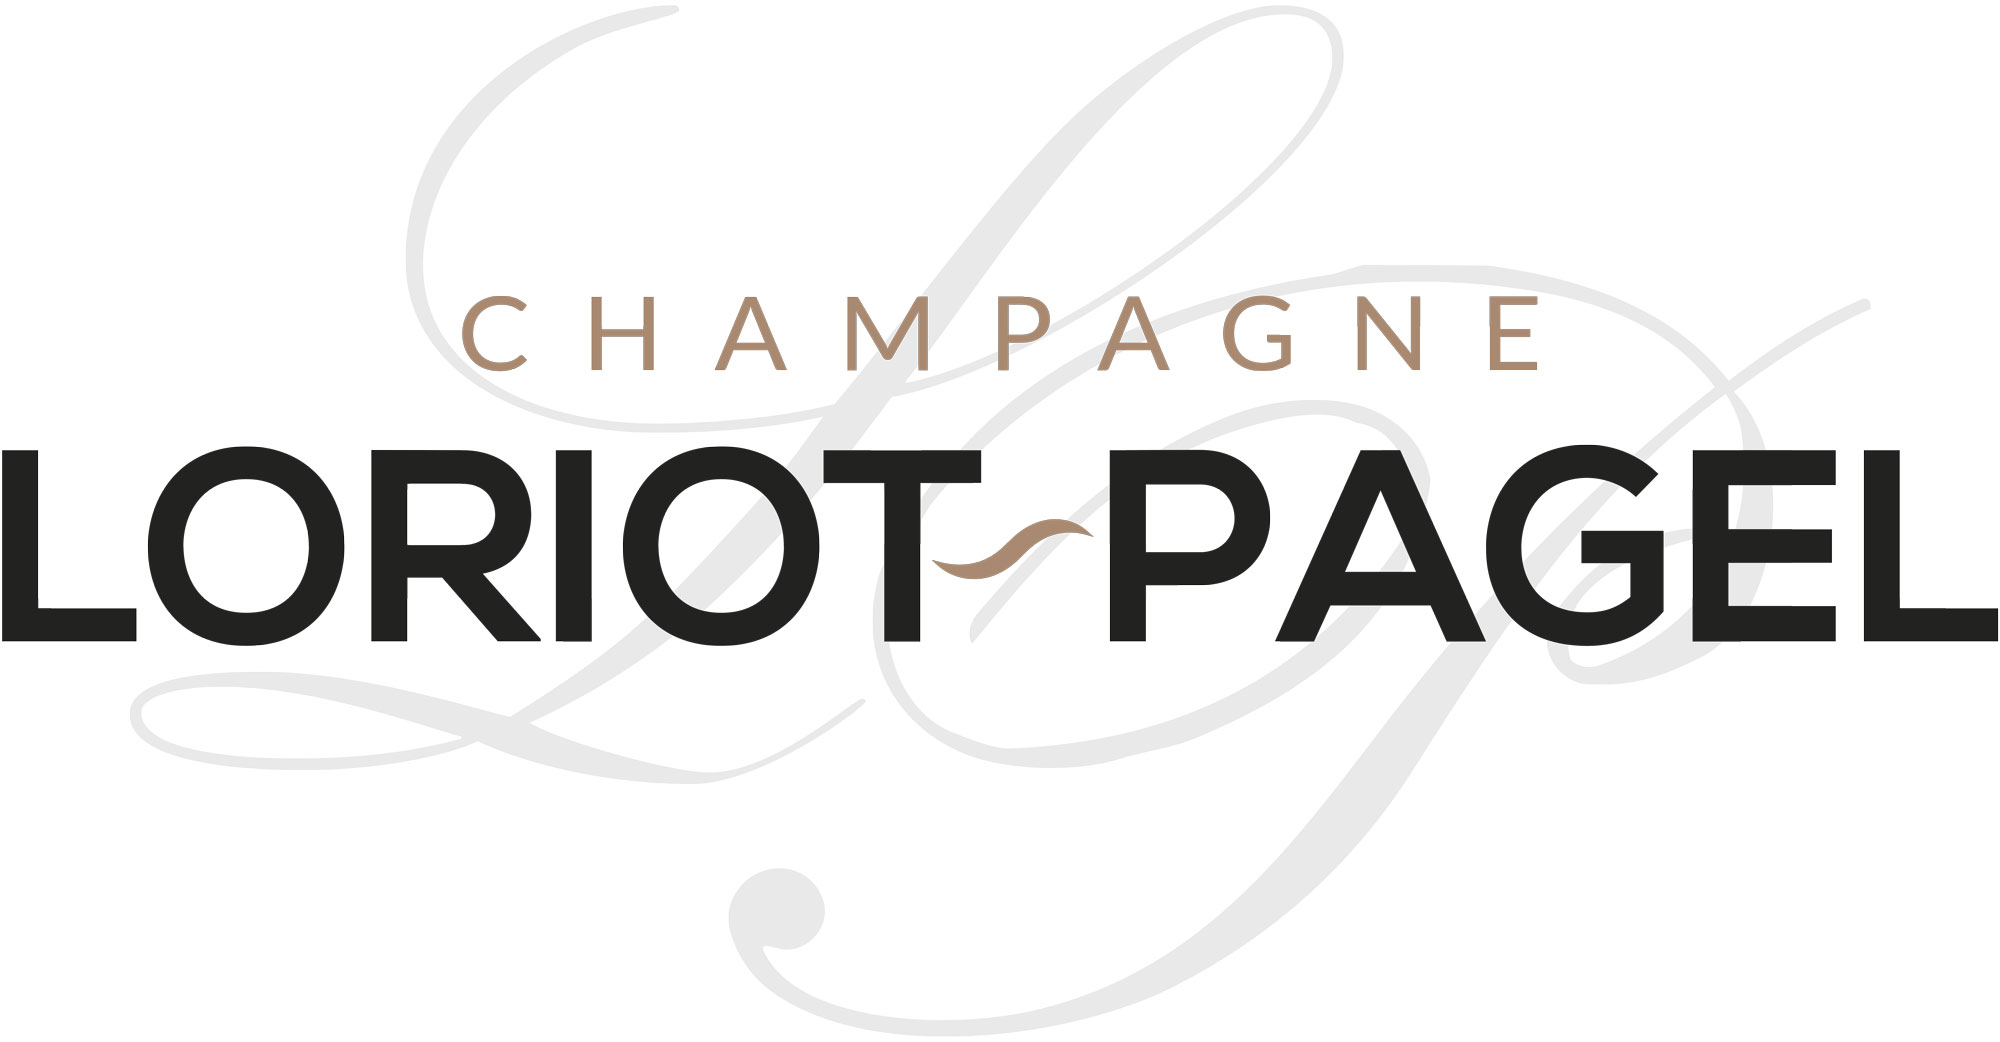 Champagne Loriot-Pagel